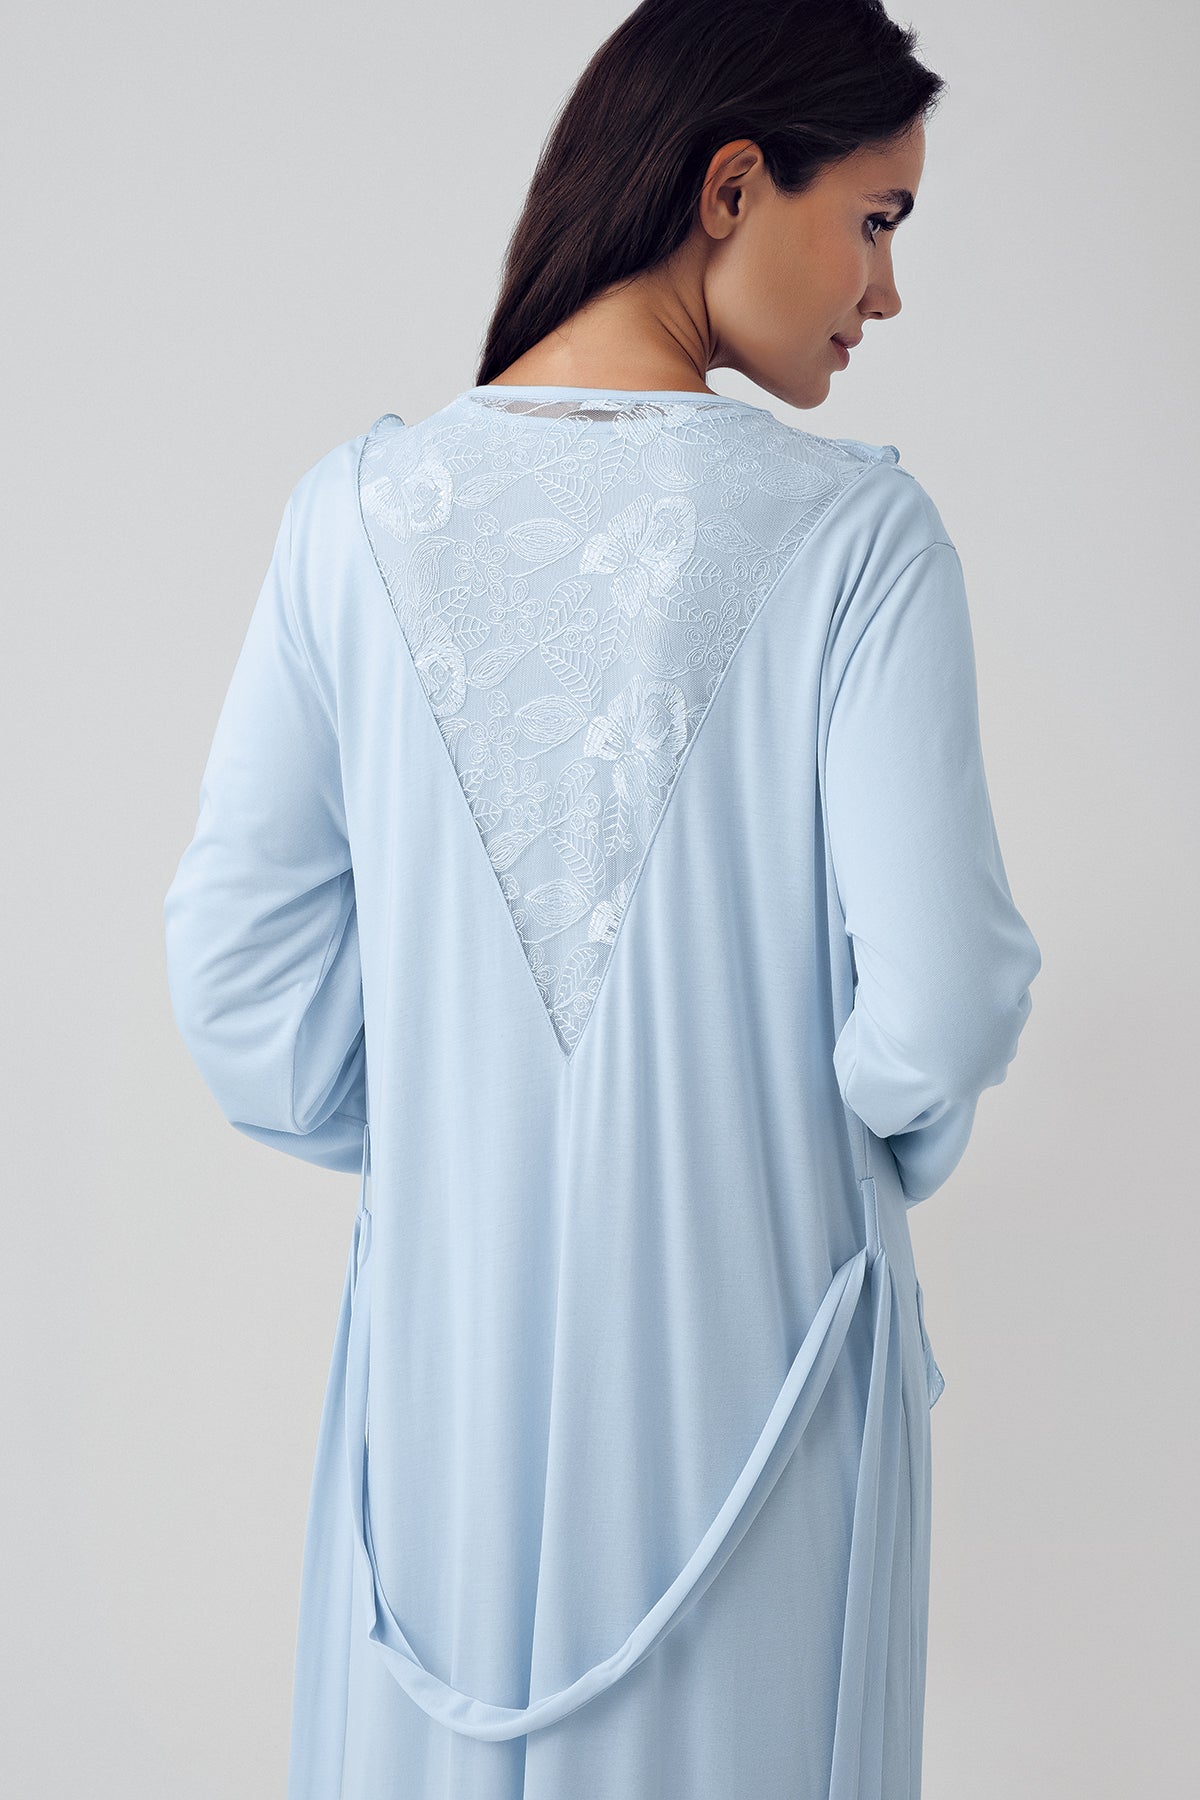 Shopymommy 15410 Lace Detailed Maternity & Nursing Nightgown With Robe Blue